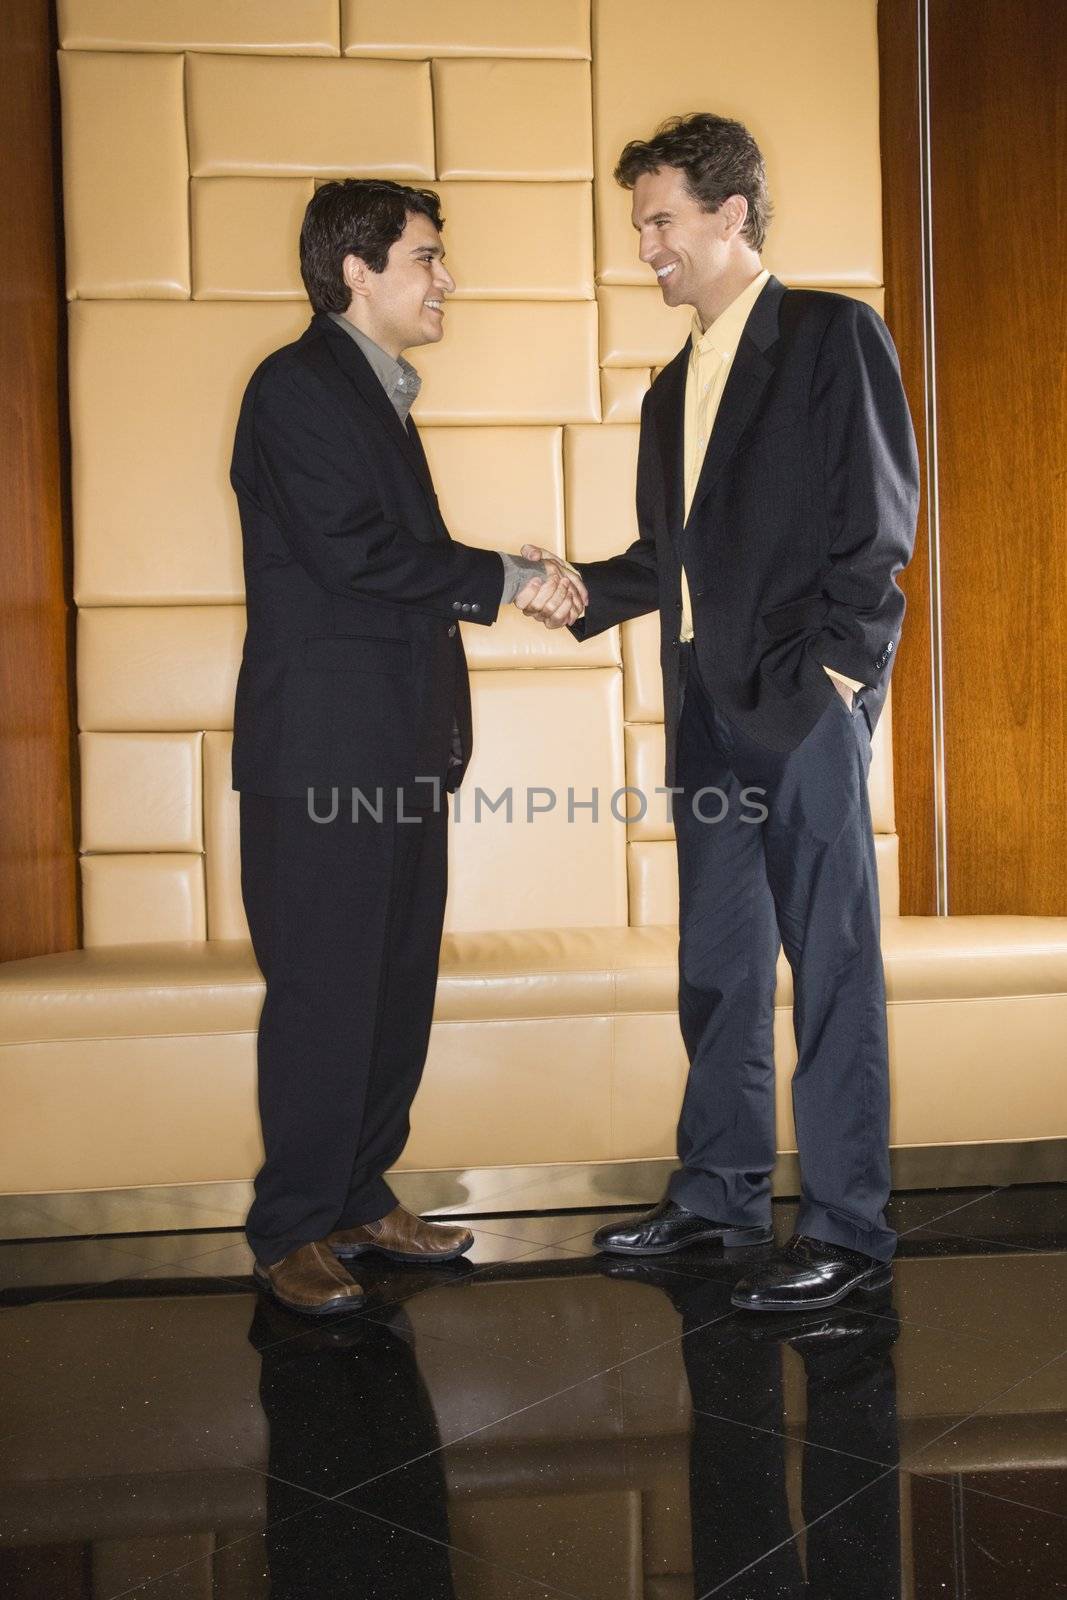 Two businessmen standing and shaking hands.